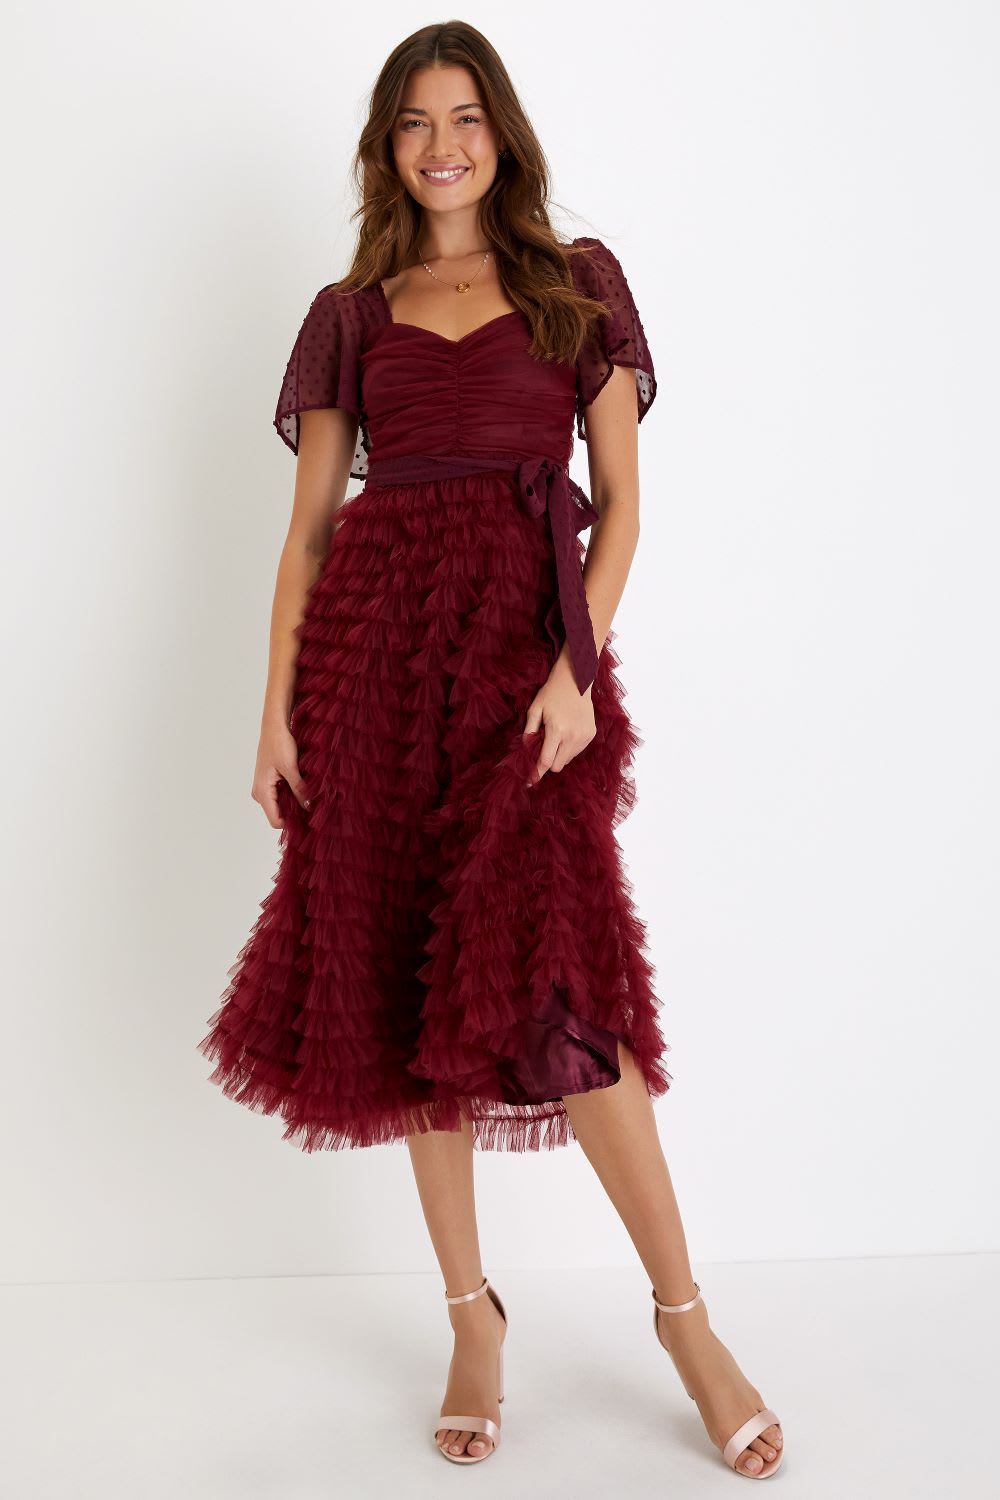 Women's Holiday Party Dresses: Shop Outfit Ideas From 2023's Top Trends -   Blog